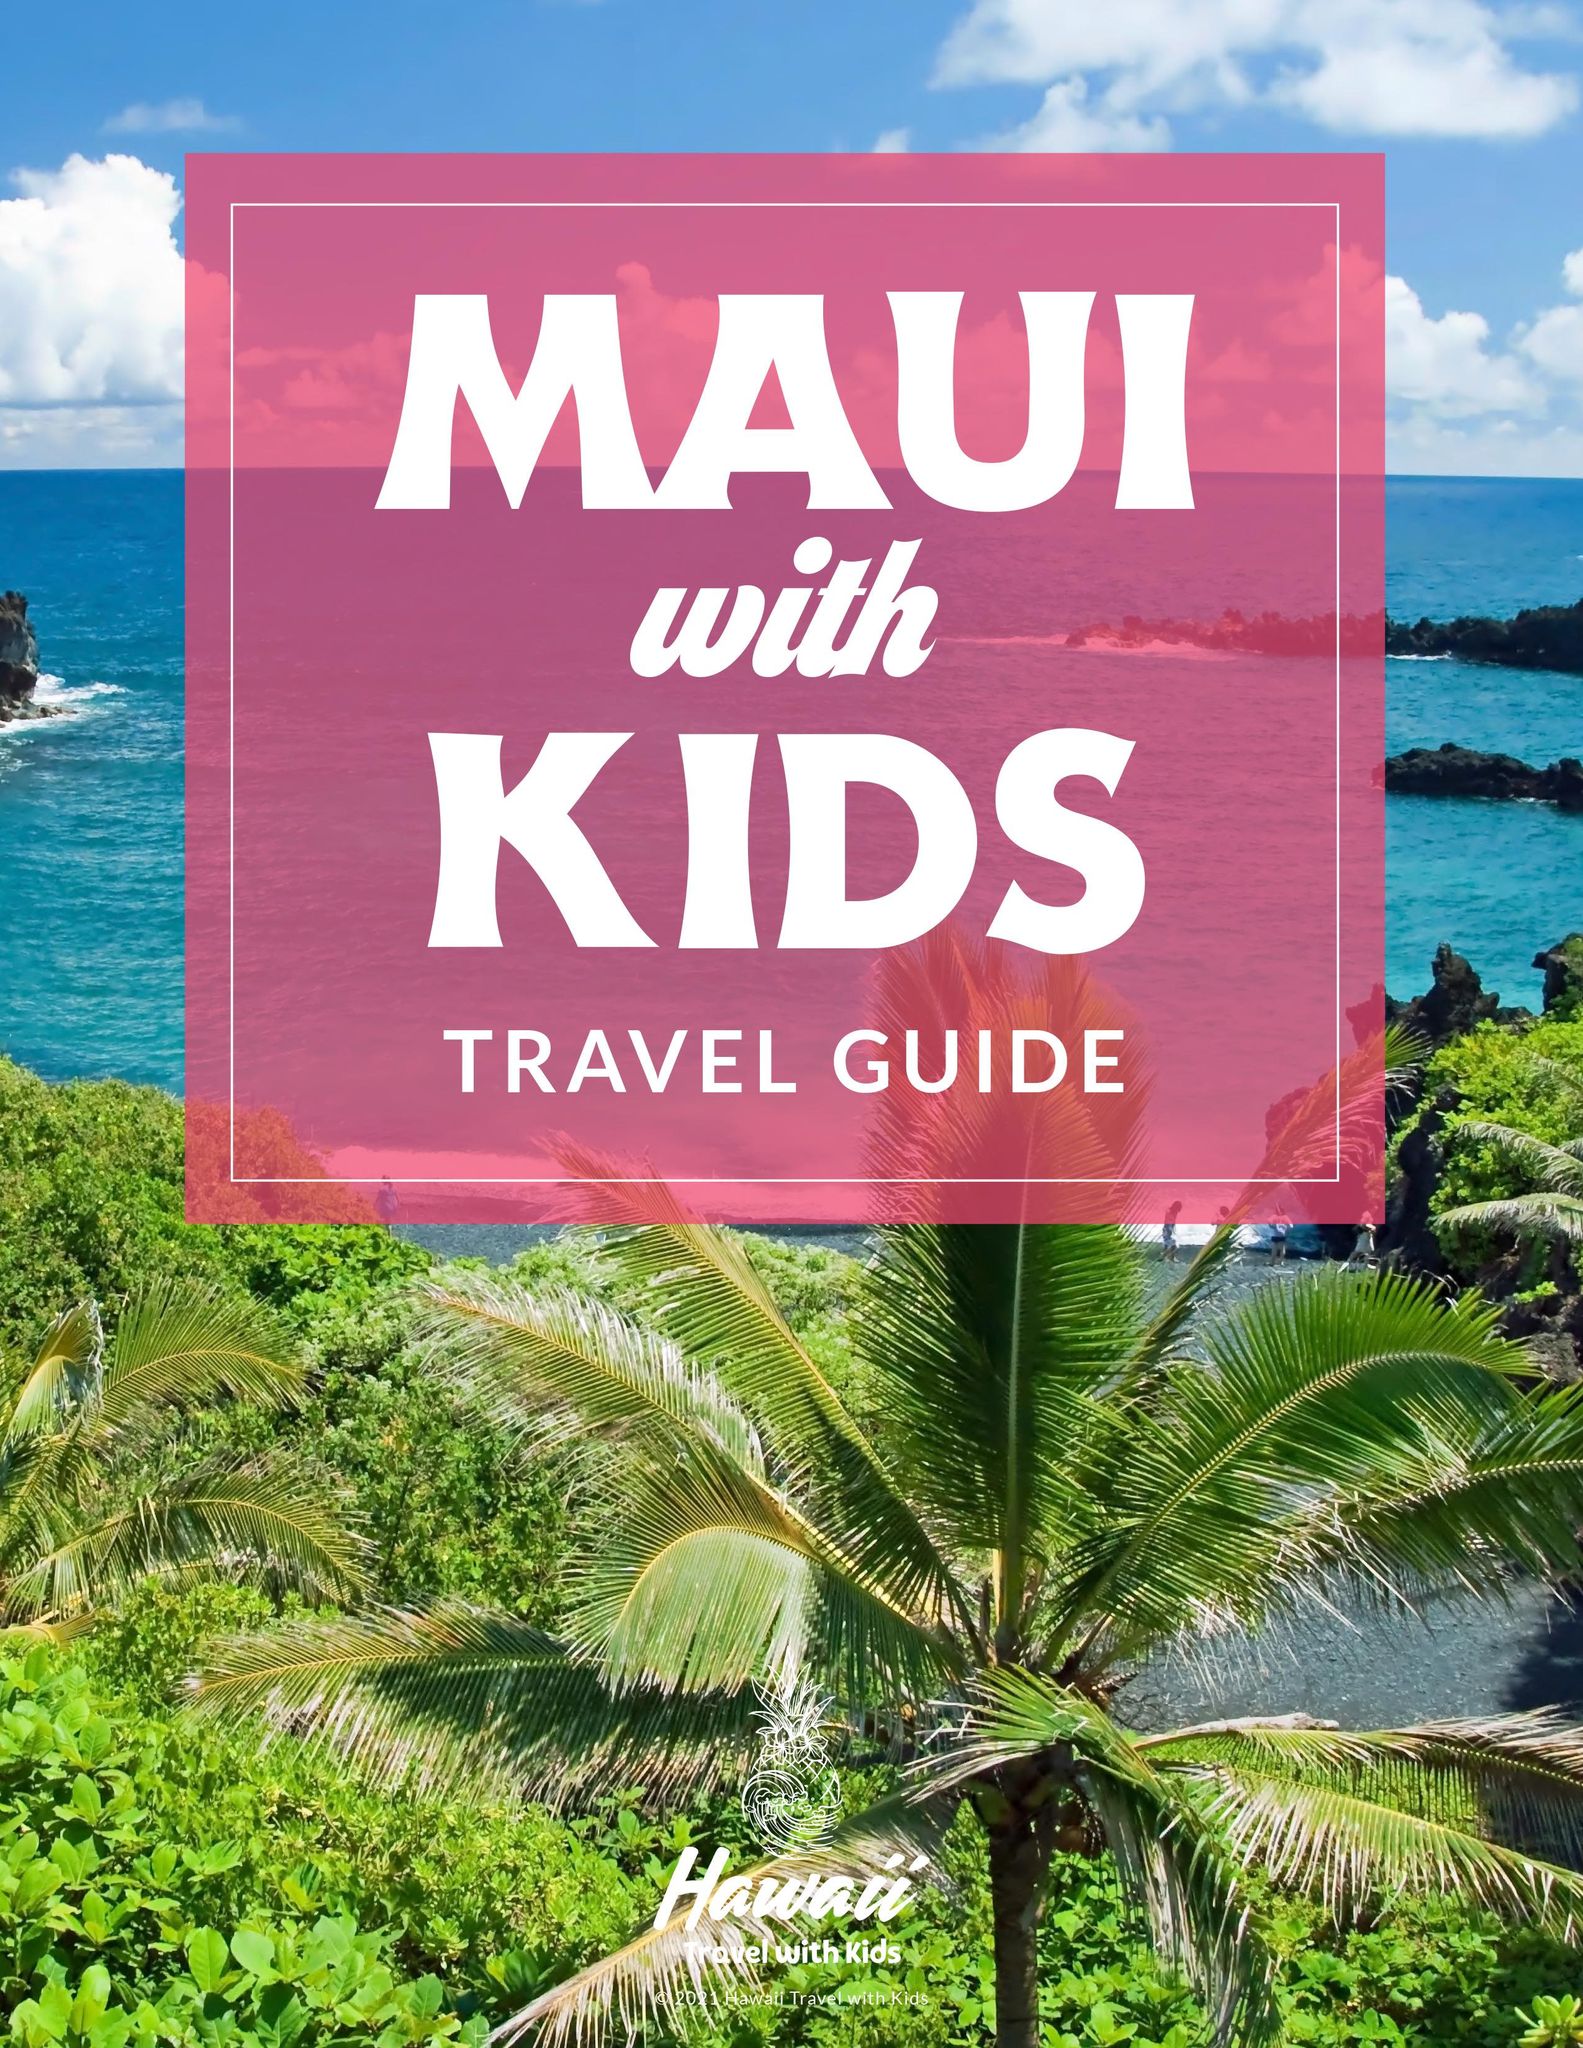 Hawaii Travel with Kids shares comprehensive travel guides for busy parents. 1